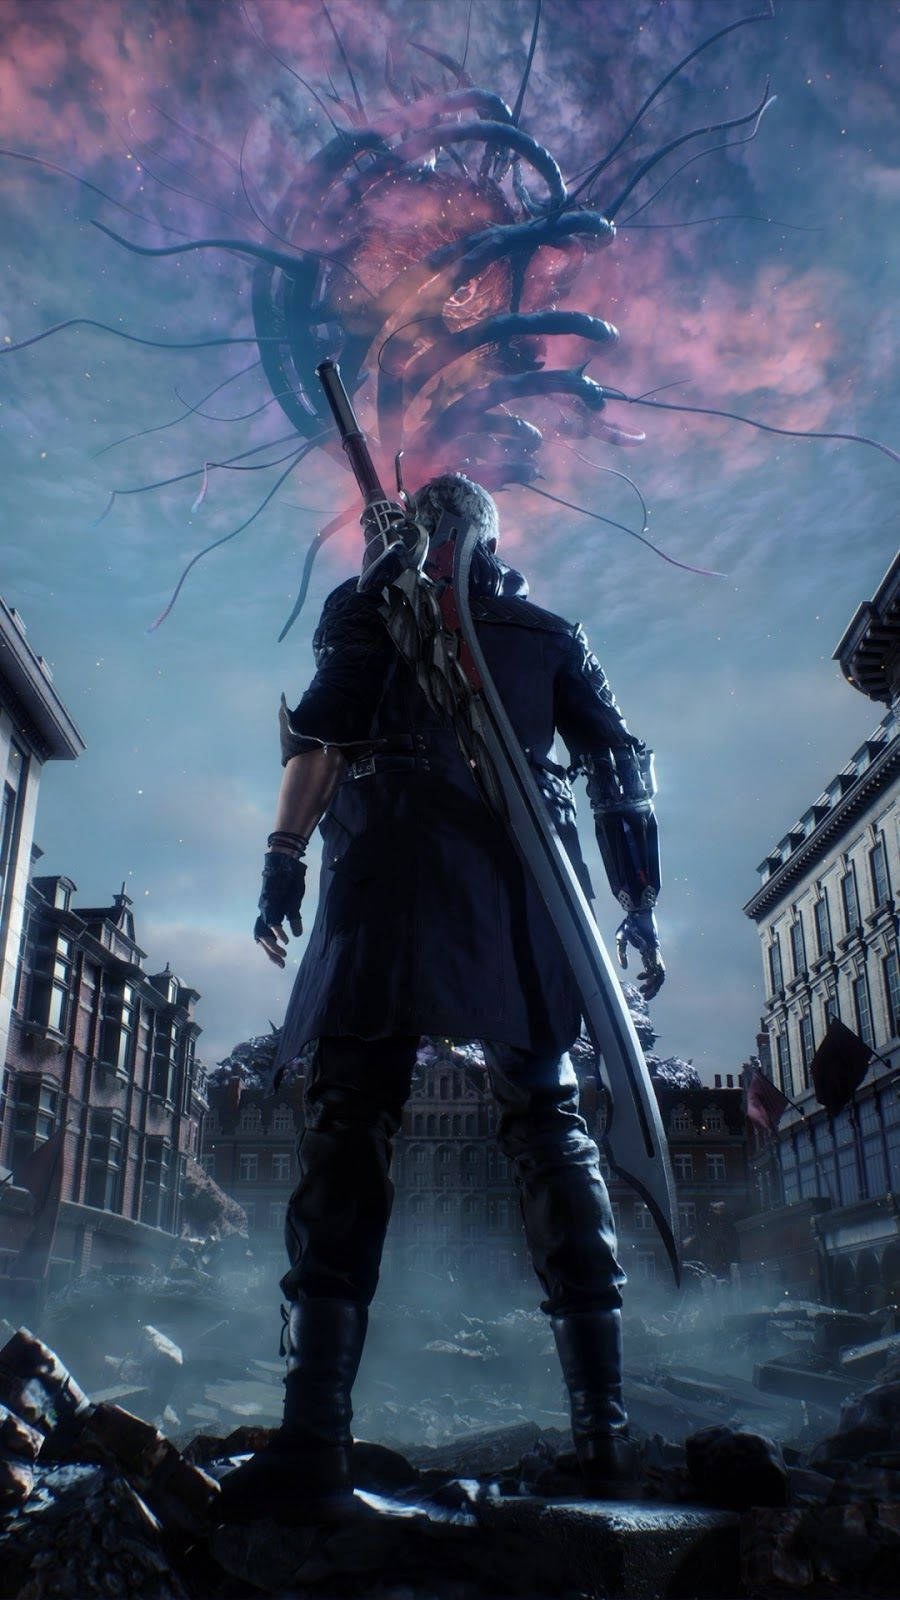 Devil May Cry 5 - Wallpaper Background